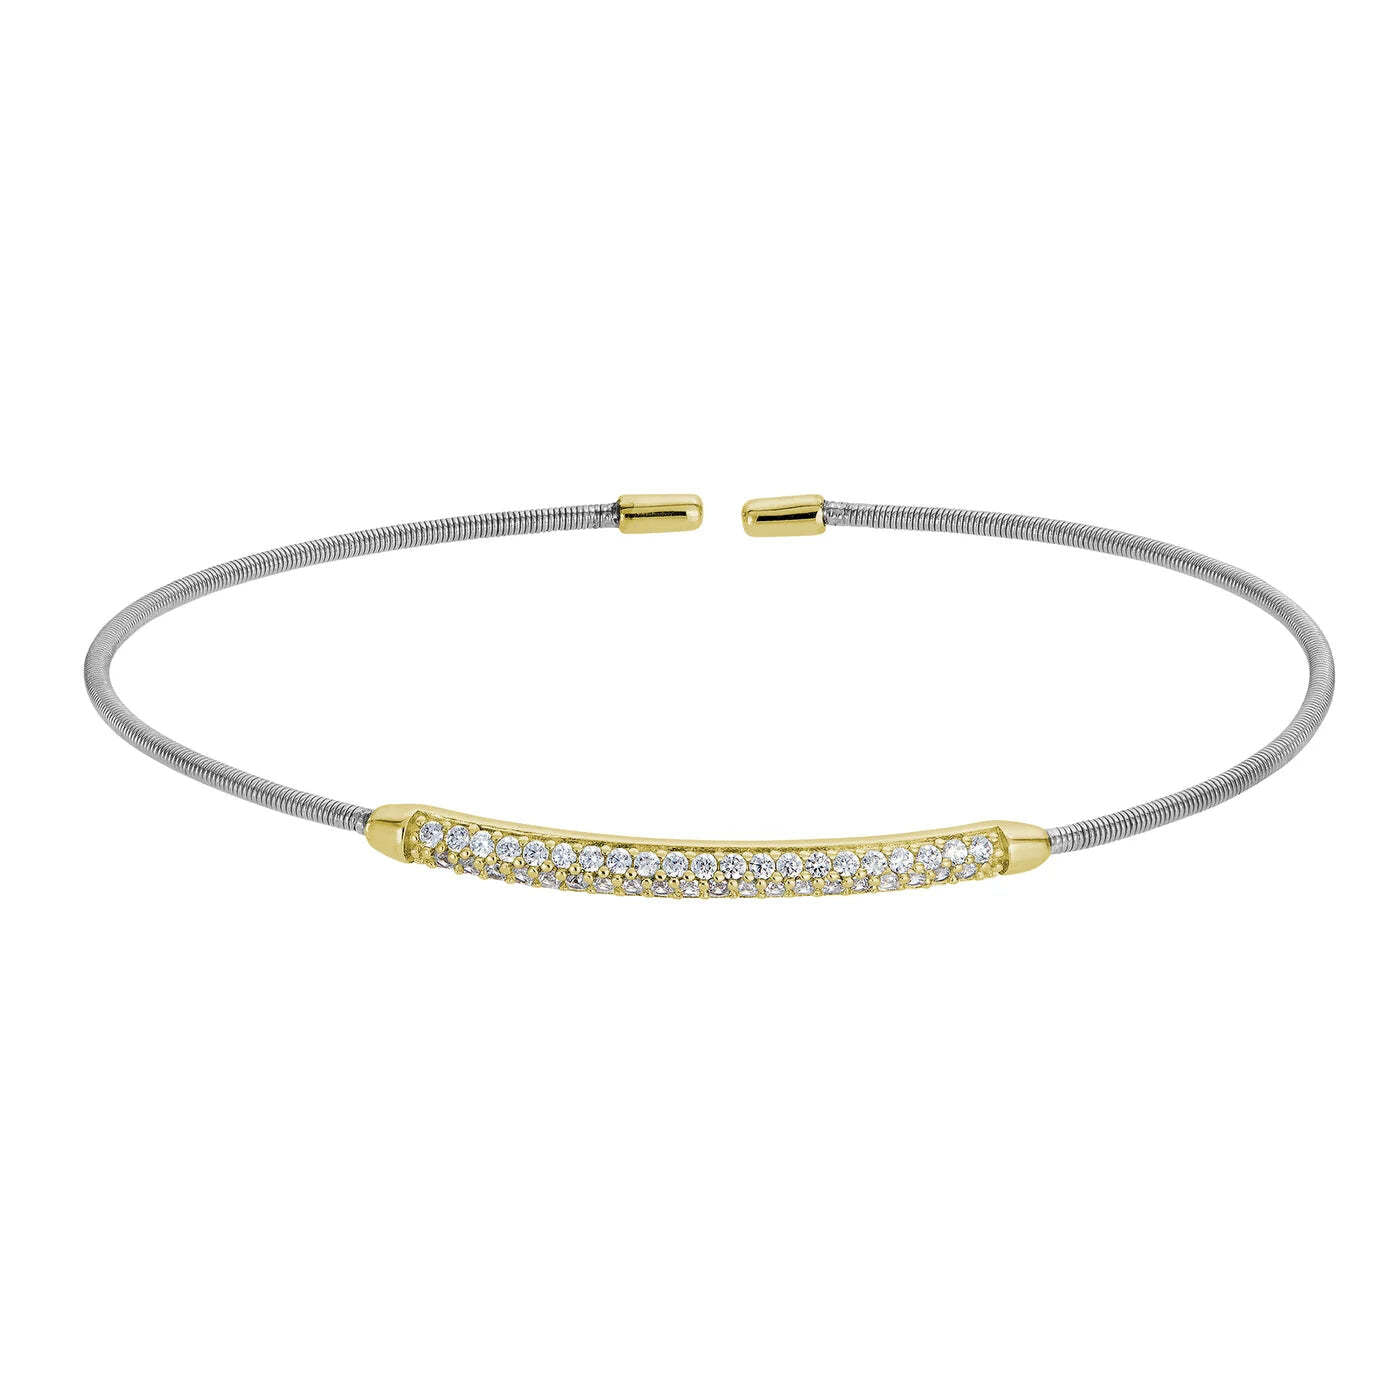 A sterling silver cable bracelet with double rows of simulated diamonds displayed on a neutral white background.